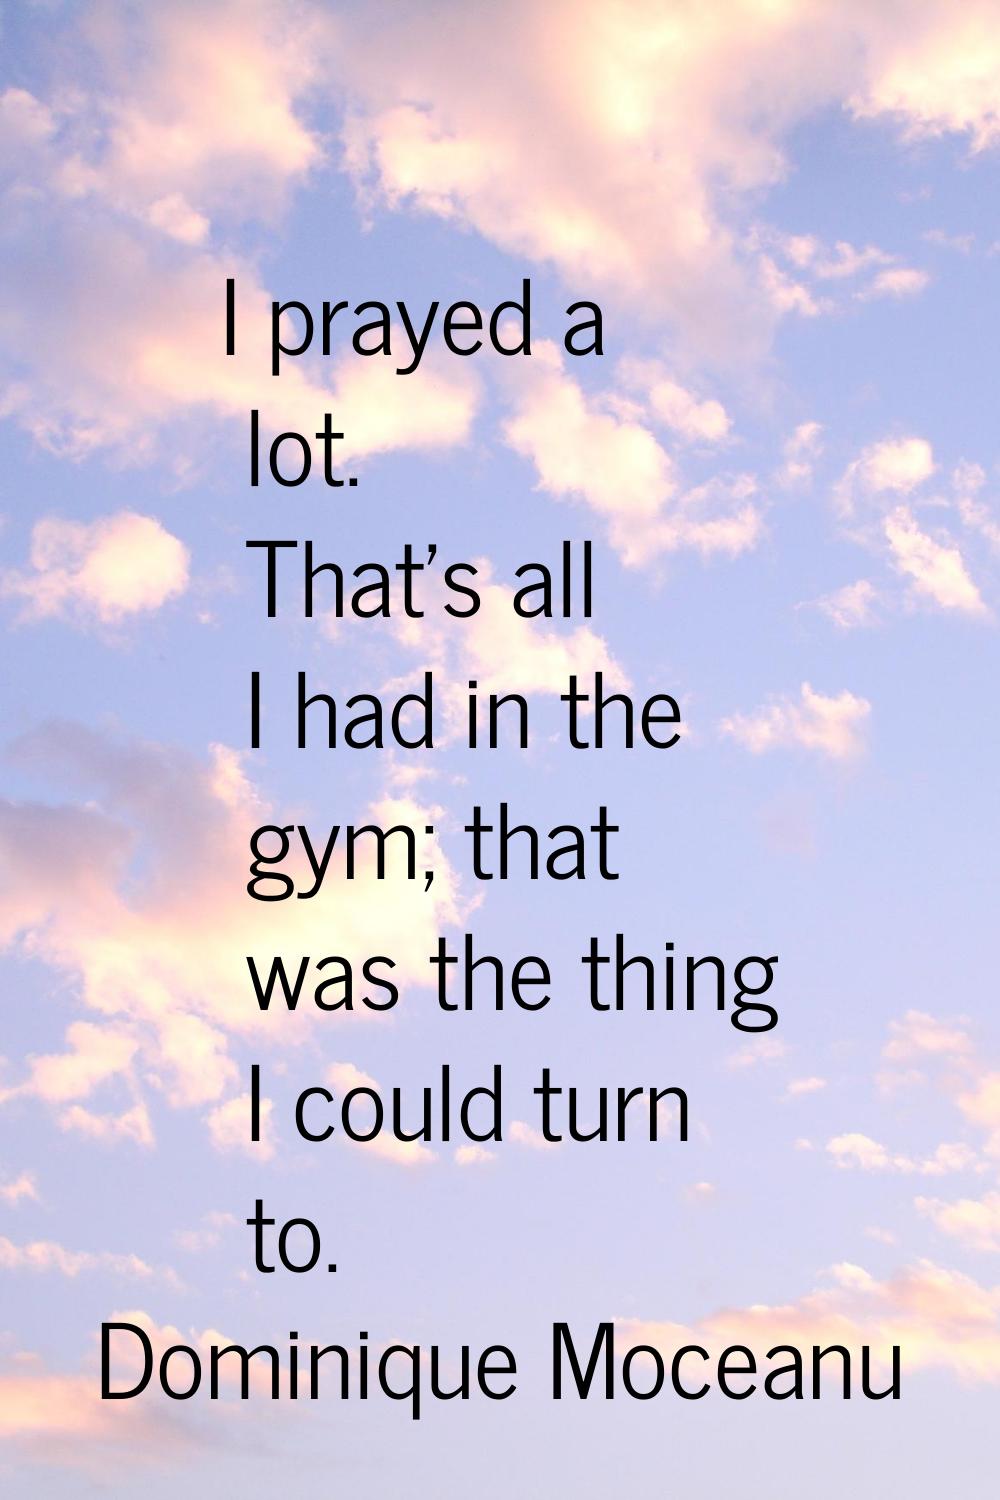 I prayed a lot. That's all I had in the gym; that was the thing I could turn to.